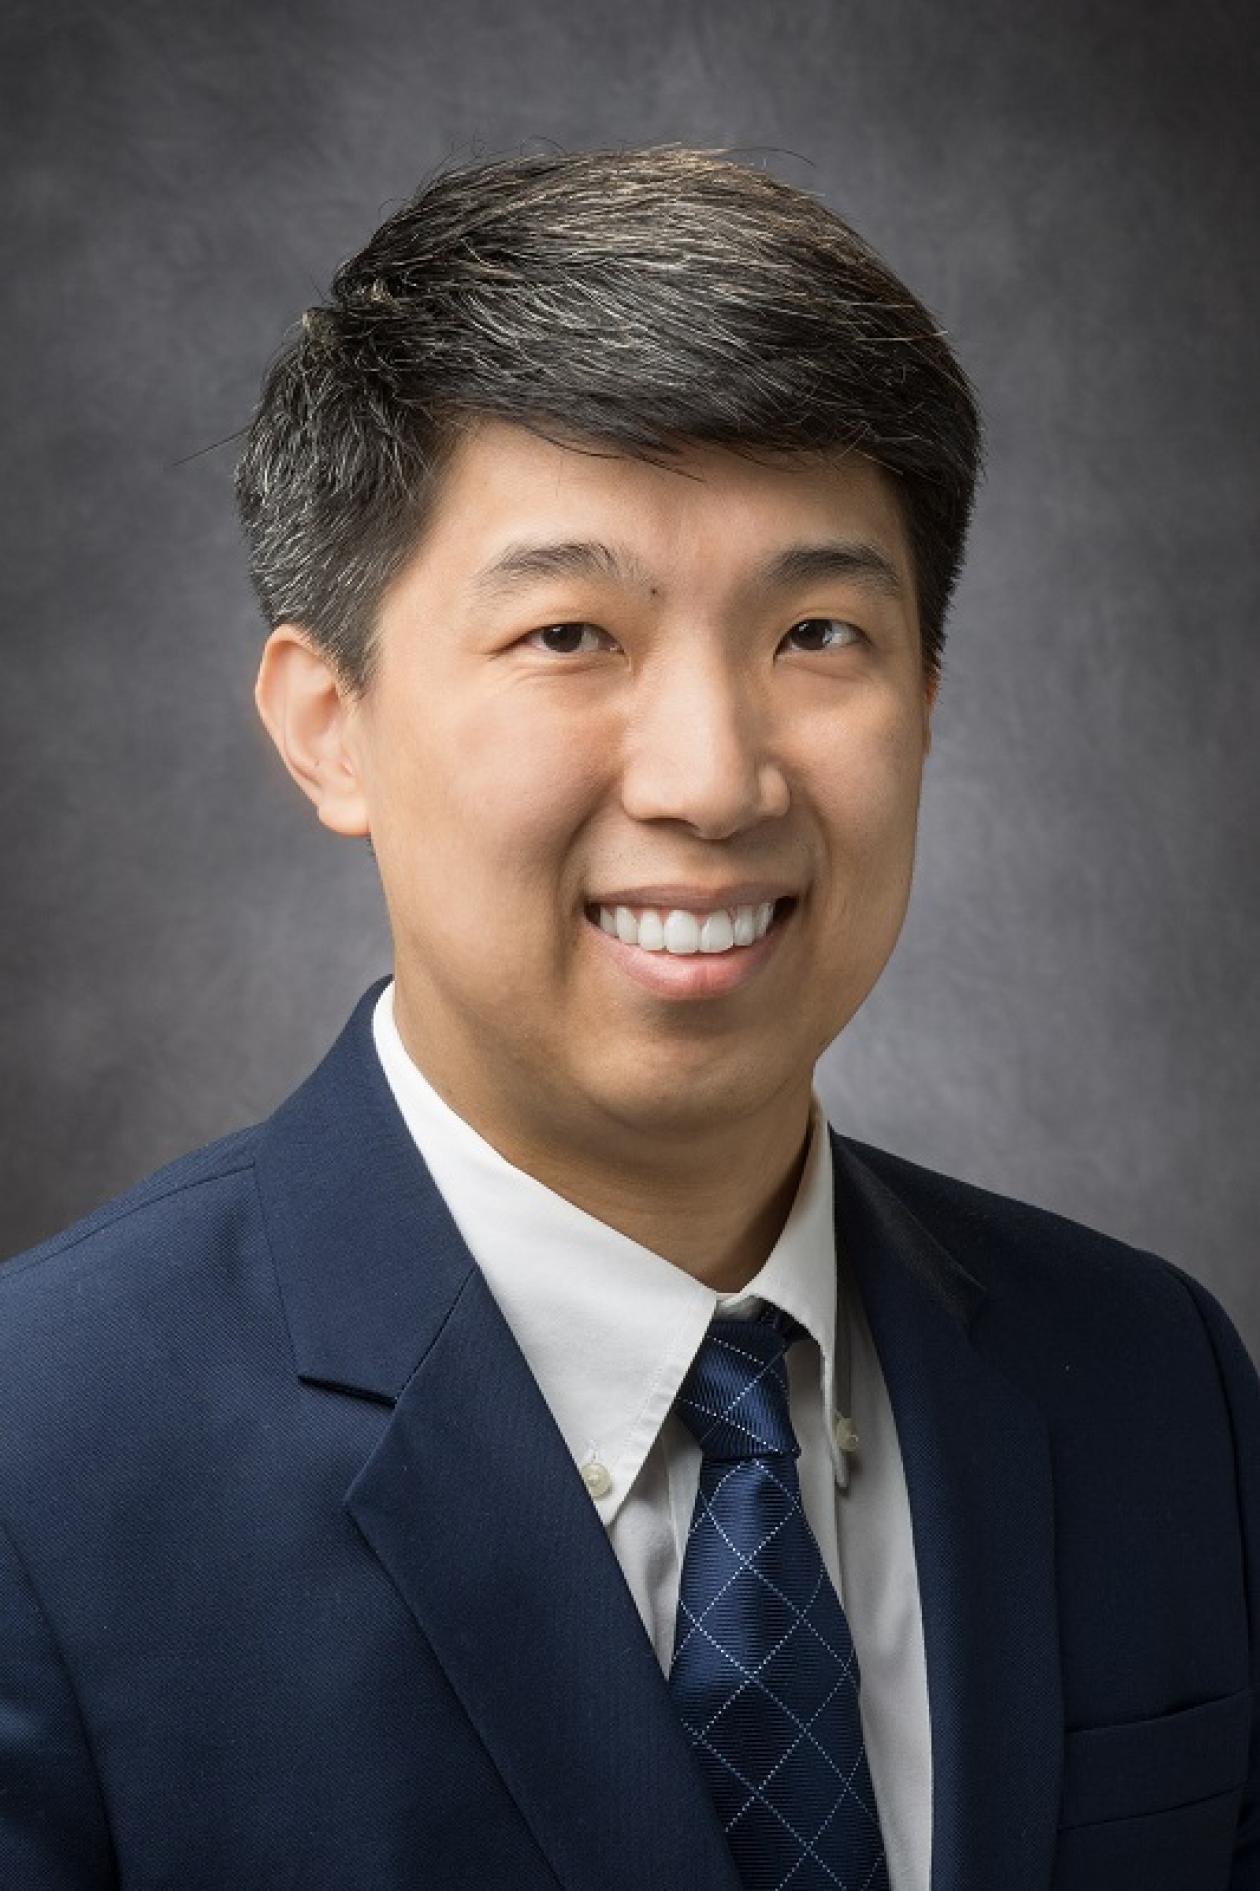 Headshot of Dr. Clinton Yam smiling and looking at the camera, in front of a dark gray backdrop.